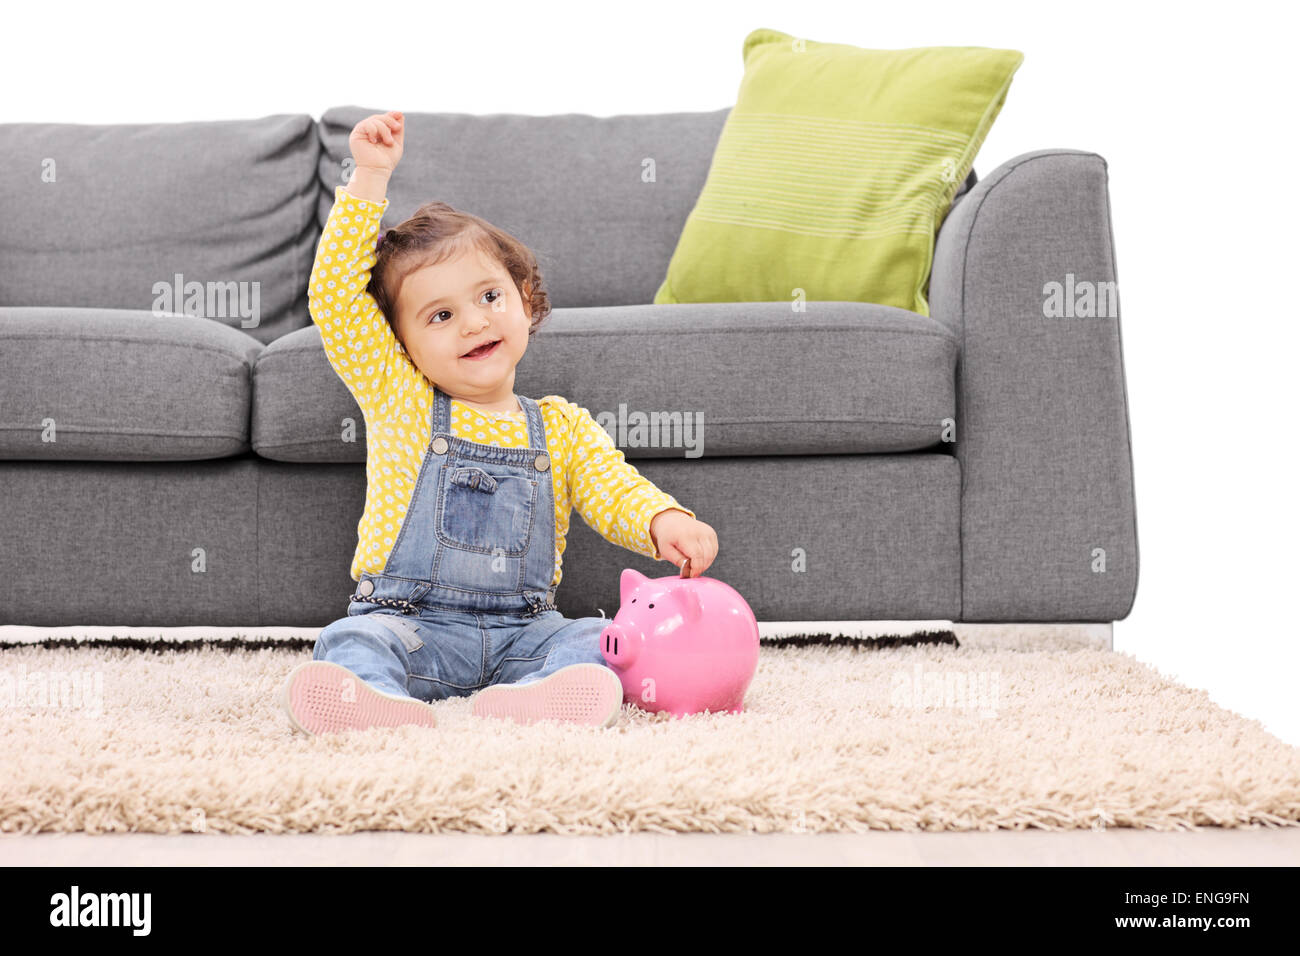 Studio shot of a cute little girl putting money into a piggybank seated on the floor in front of a modern gray sofa Stock Photo